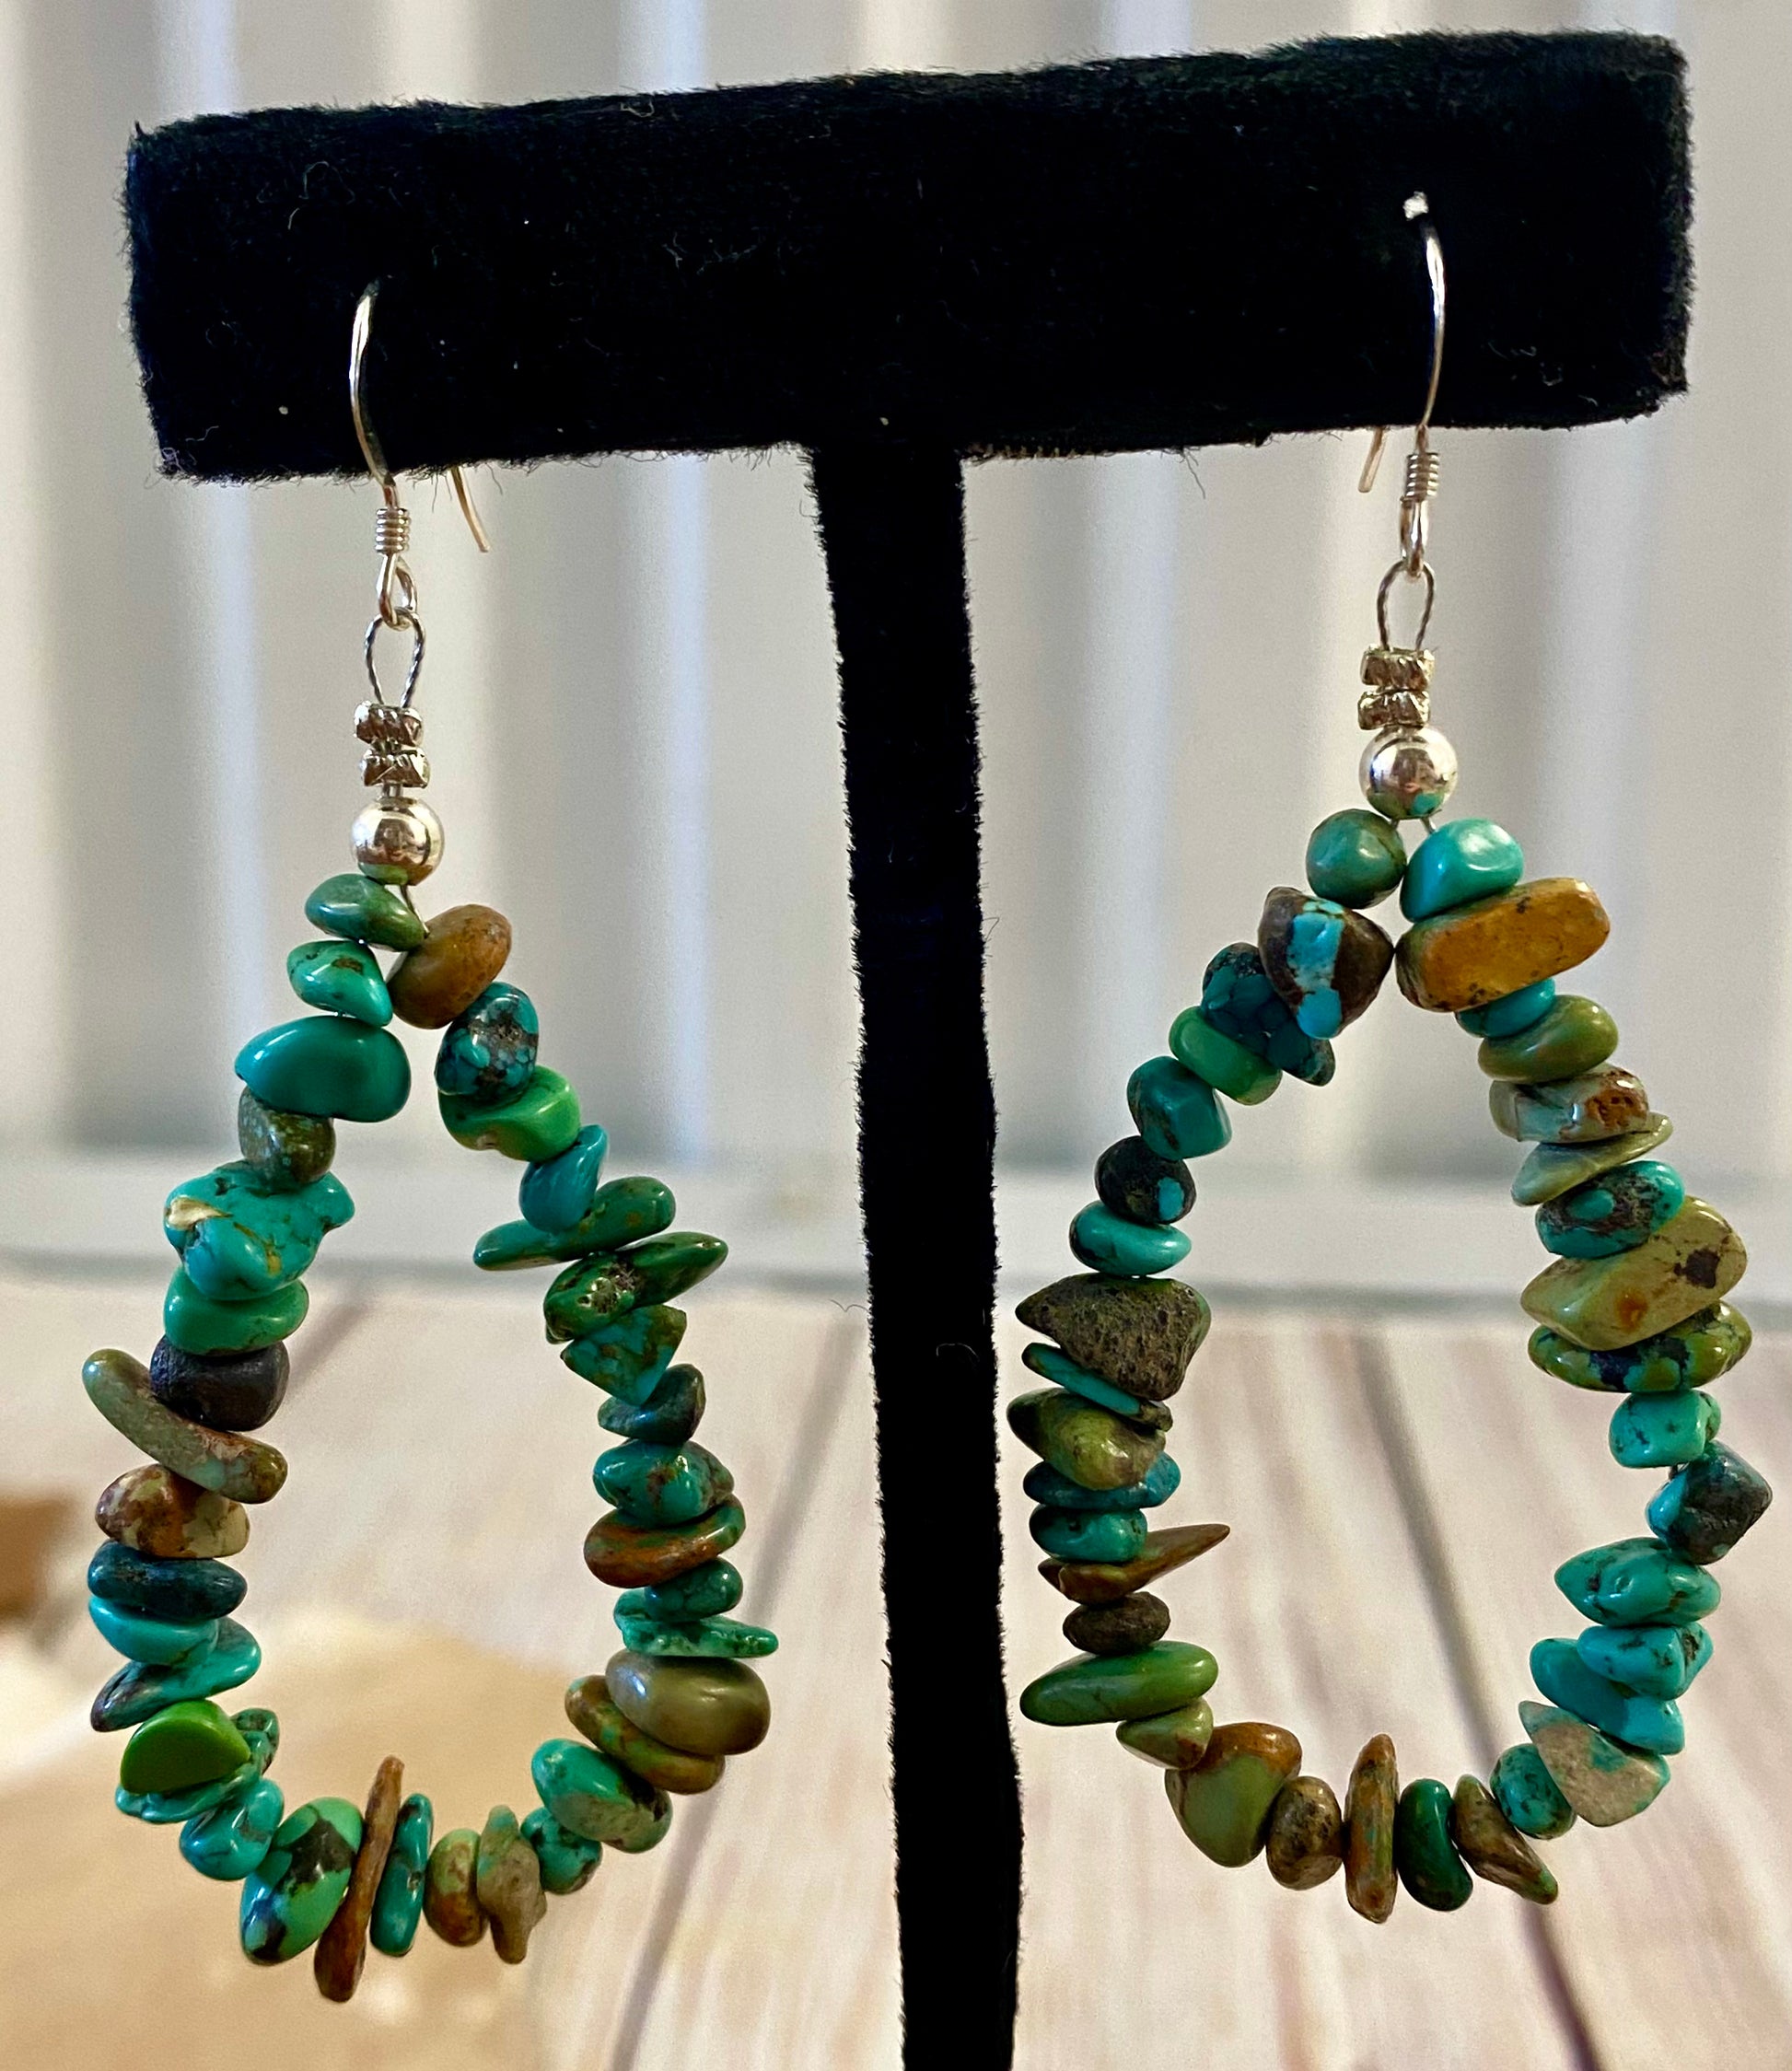 Native American Made Sterling Silver Turquoise Beaded Teardrop Earrings Lightweight turquoise chip sterling silver teardrop earrings. These Native made turquoise earrings are the perfect staple everyday piece to add to your jewelry collection or gift to a loved one! Easy to pair with almost any outfit for any occasion. From business casual to formal outfits.   Size: 2” inch length   Stone: Turquoise